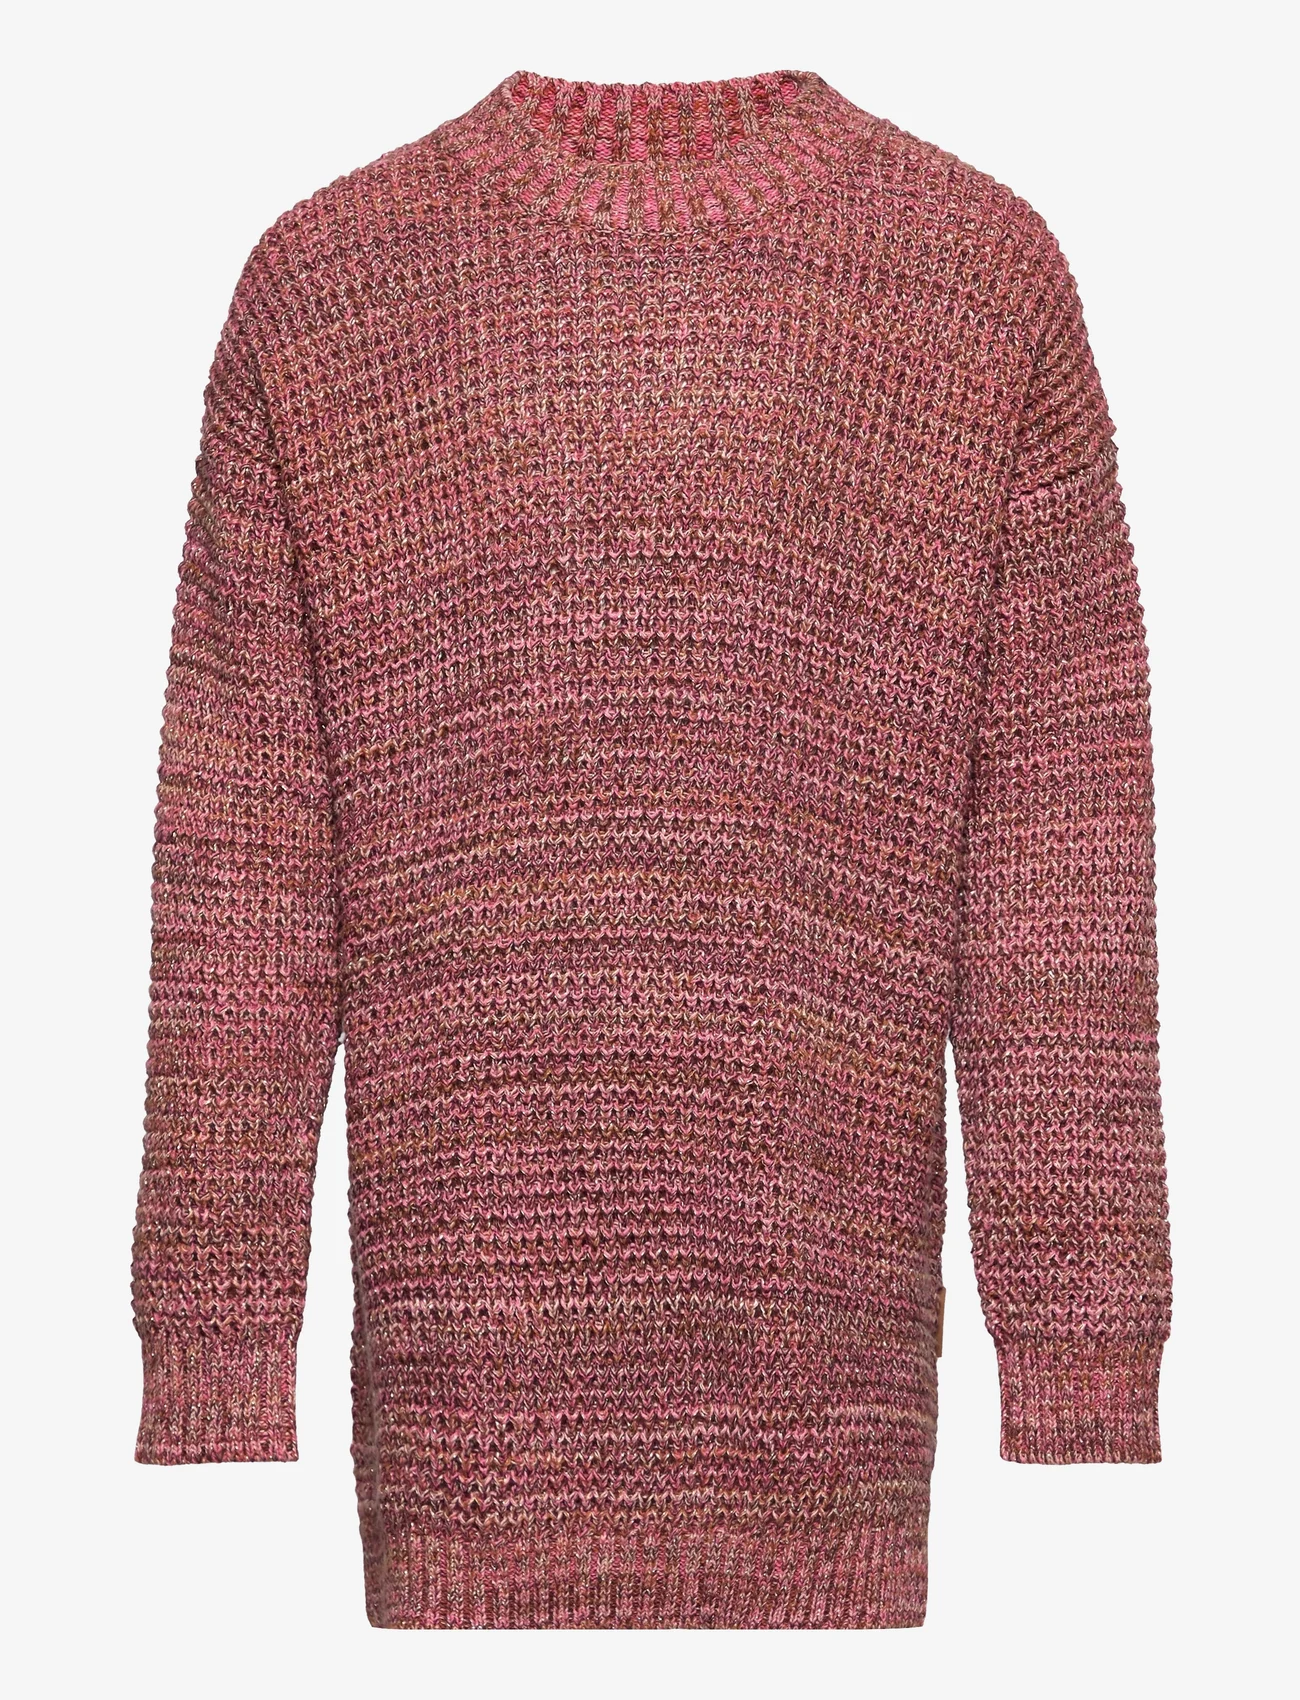 Hust & Claire - Pina - Pullover - pullover - clove rose - 0